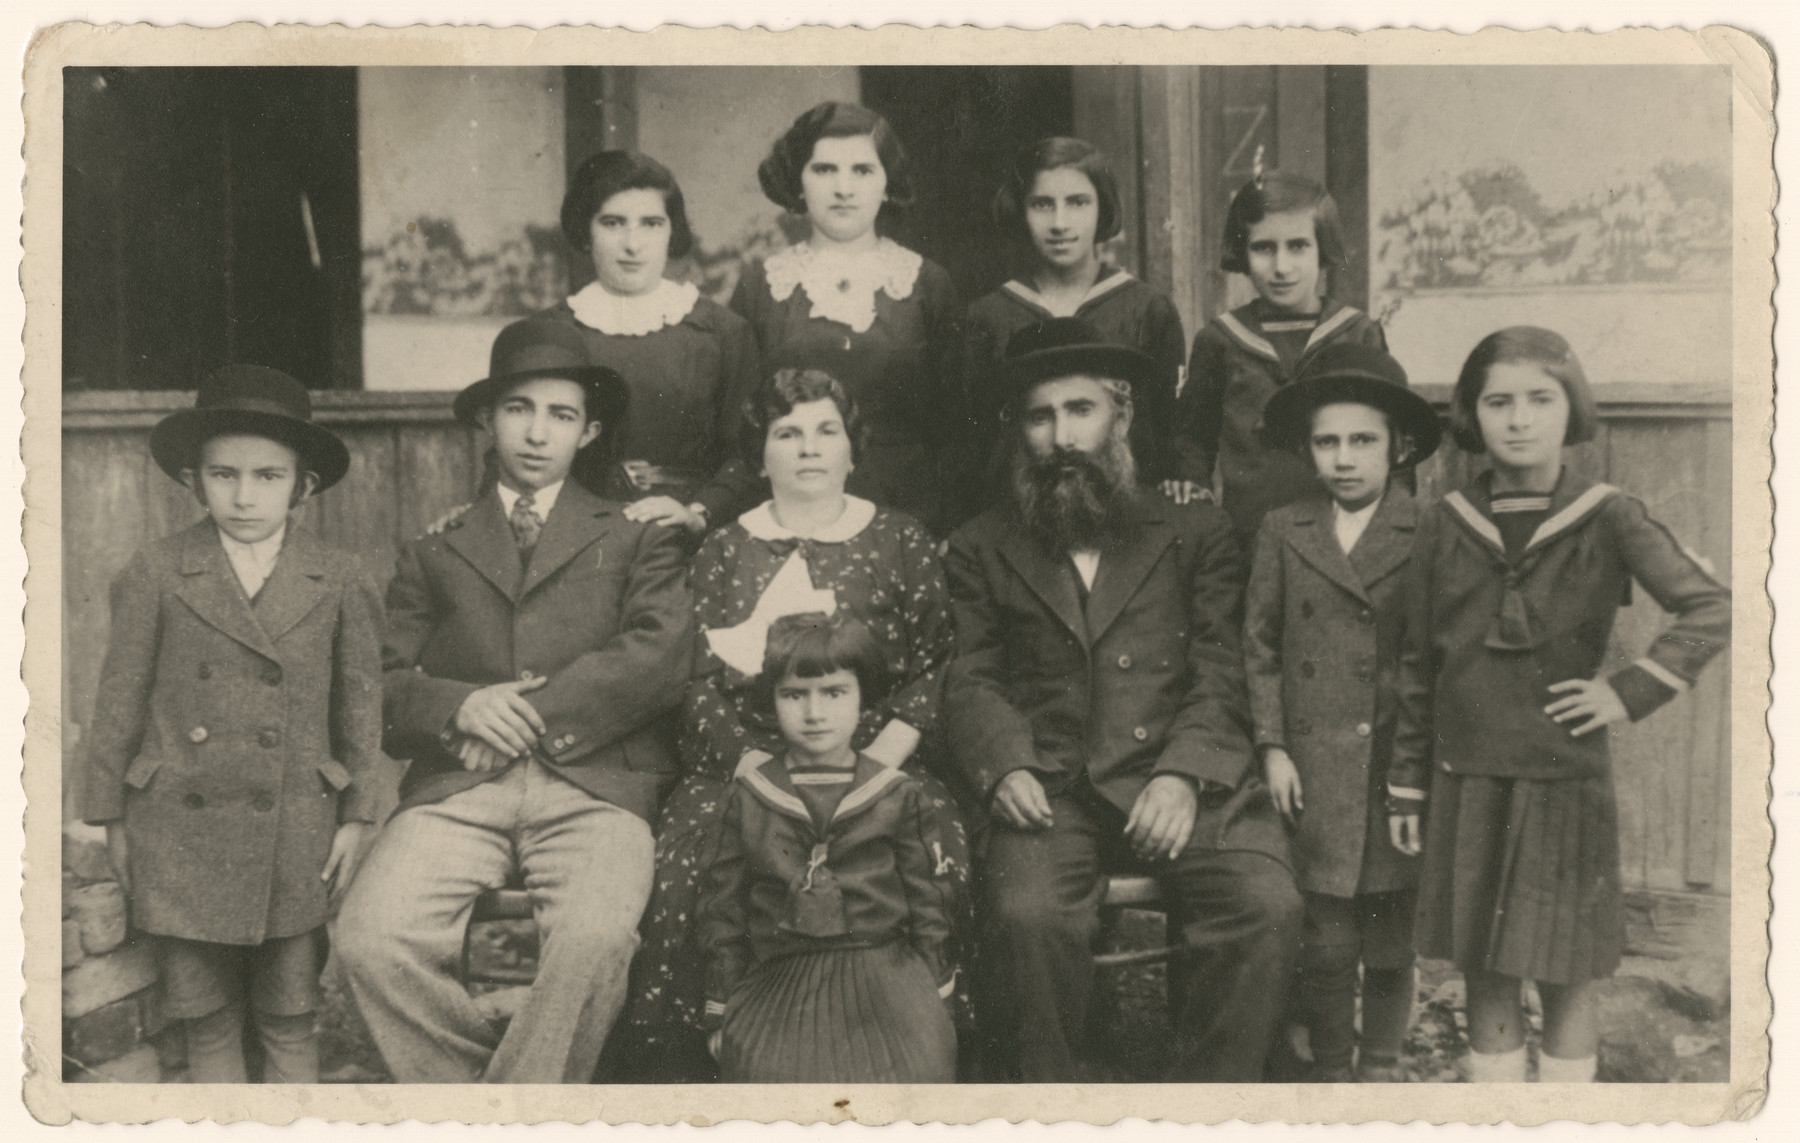 Group portrait of a large religious family, the Smilovic family, in Munkachevo.

Pictured left to right (front row): Sziku, Isaac Leib, Chana, Eva in front of her, Mordche Shmiel, Berl, Freidl.  (back row): Sheindel, Golde, Heddy and Rivke.

Chana, Mordechai Shmuel, Golda and her four year old son, and Eva perished in Auschwitz in May 1944.  Beryl was liberated from Mauthausen but never heard from again.